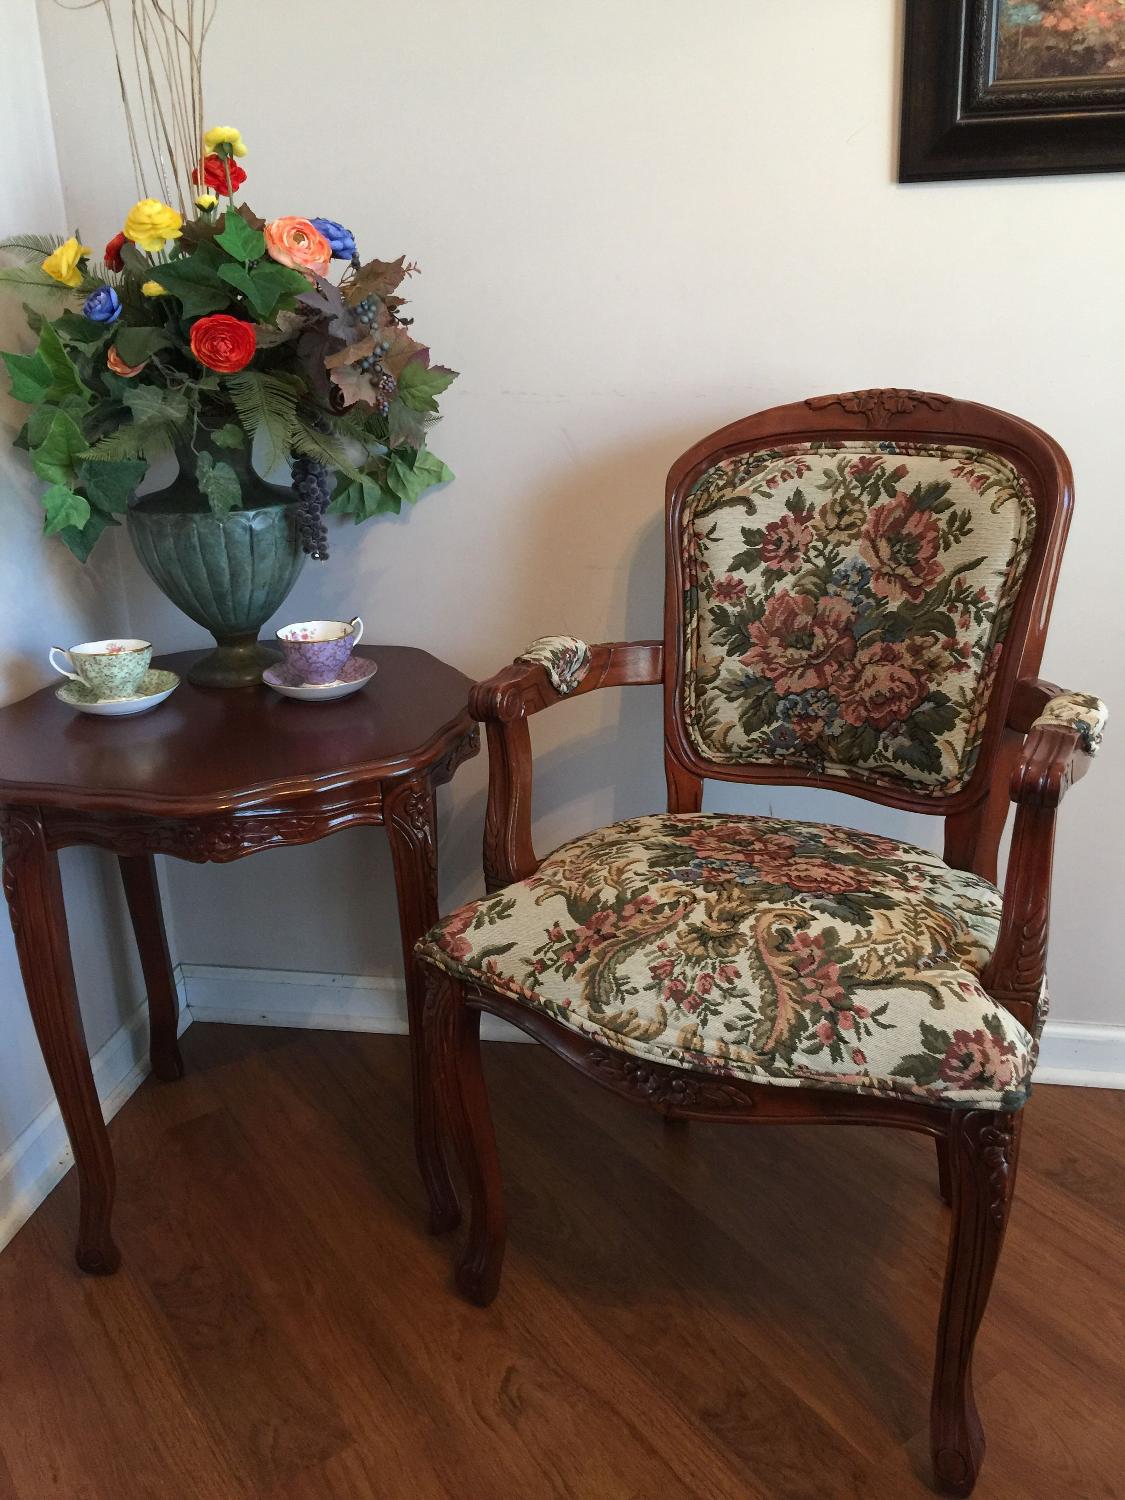 find more set two accent chairs and table for between tall end tables ikea large round coffee patio furniture covers half moon living room homemade ashley console sofa big lots